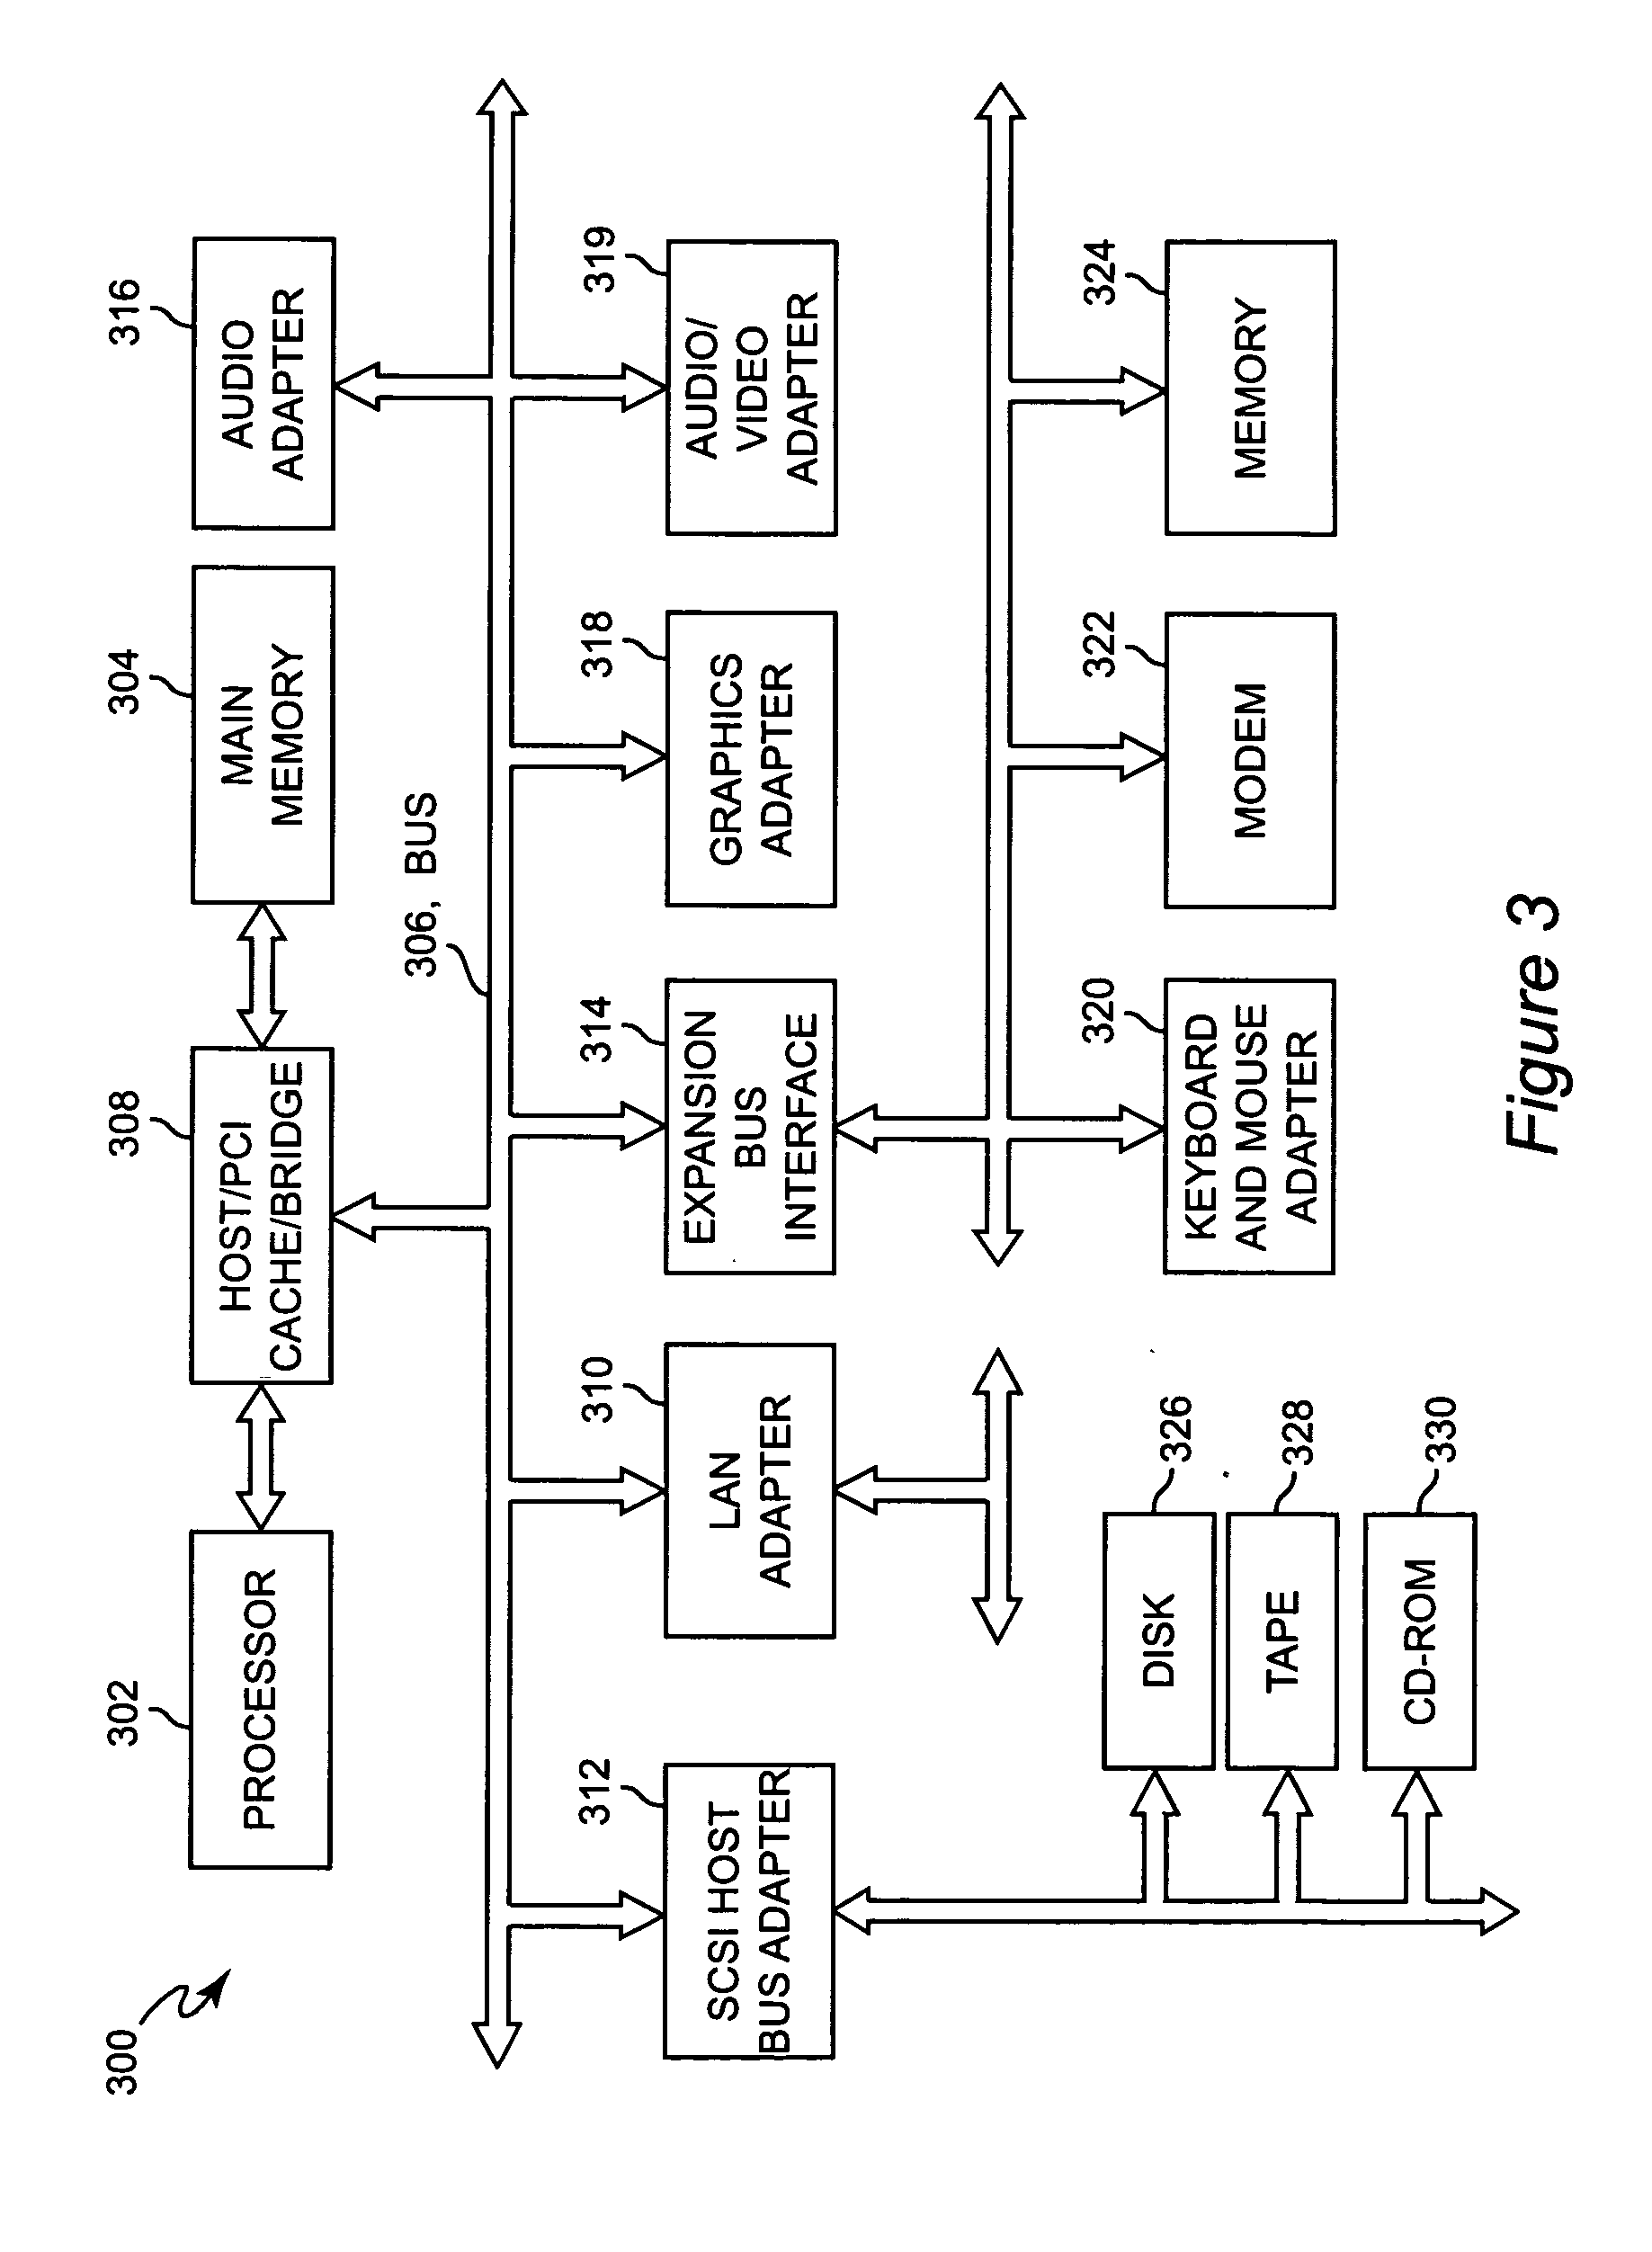 Method and apparatus of supporting business performance management with active shared data spaces